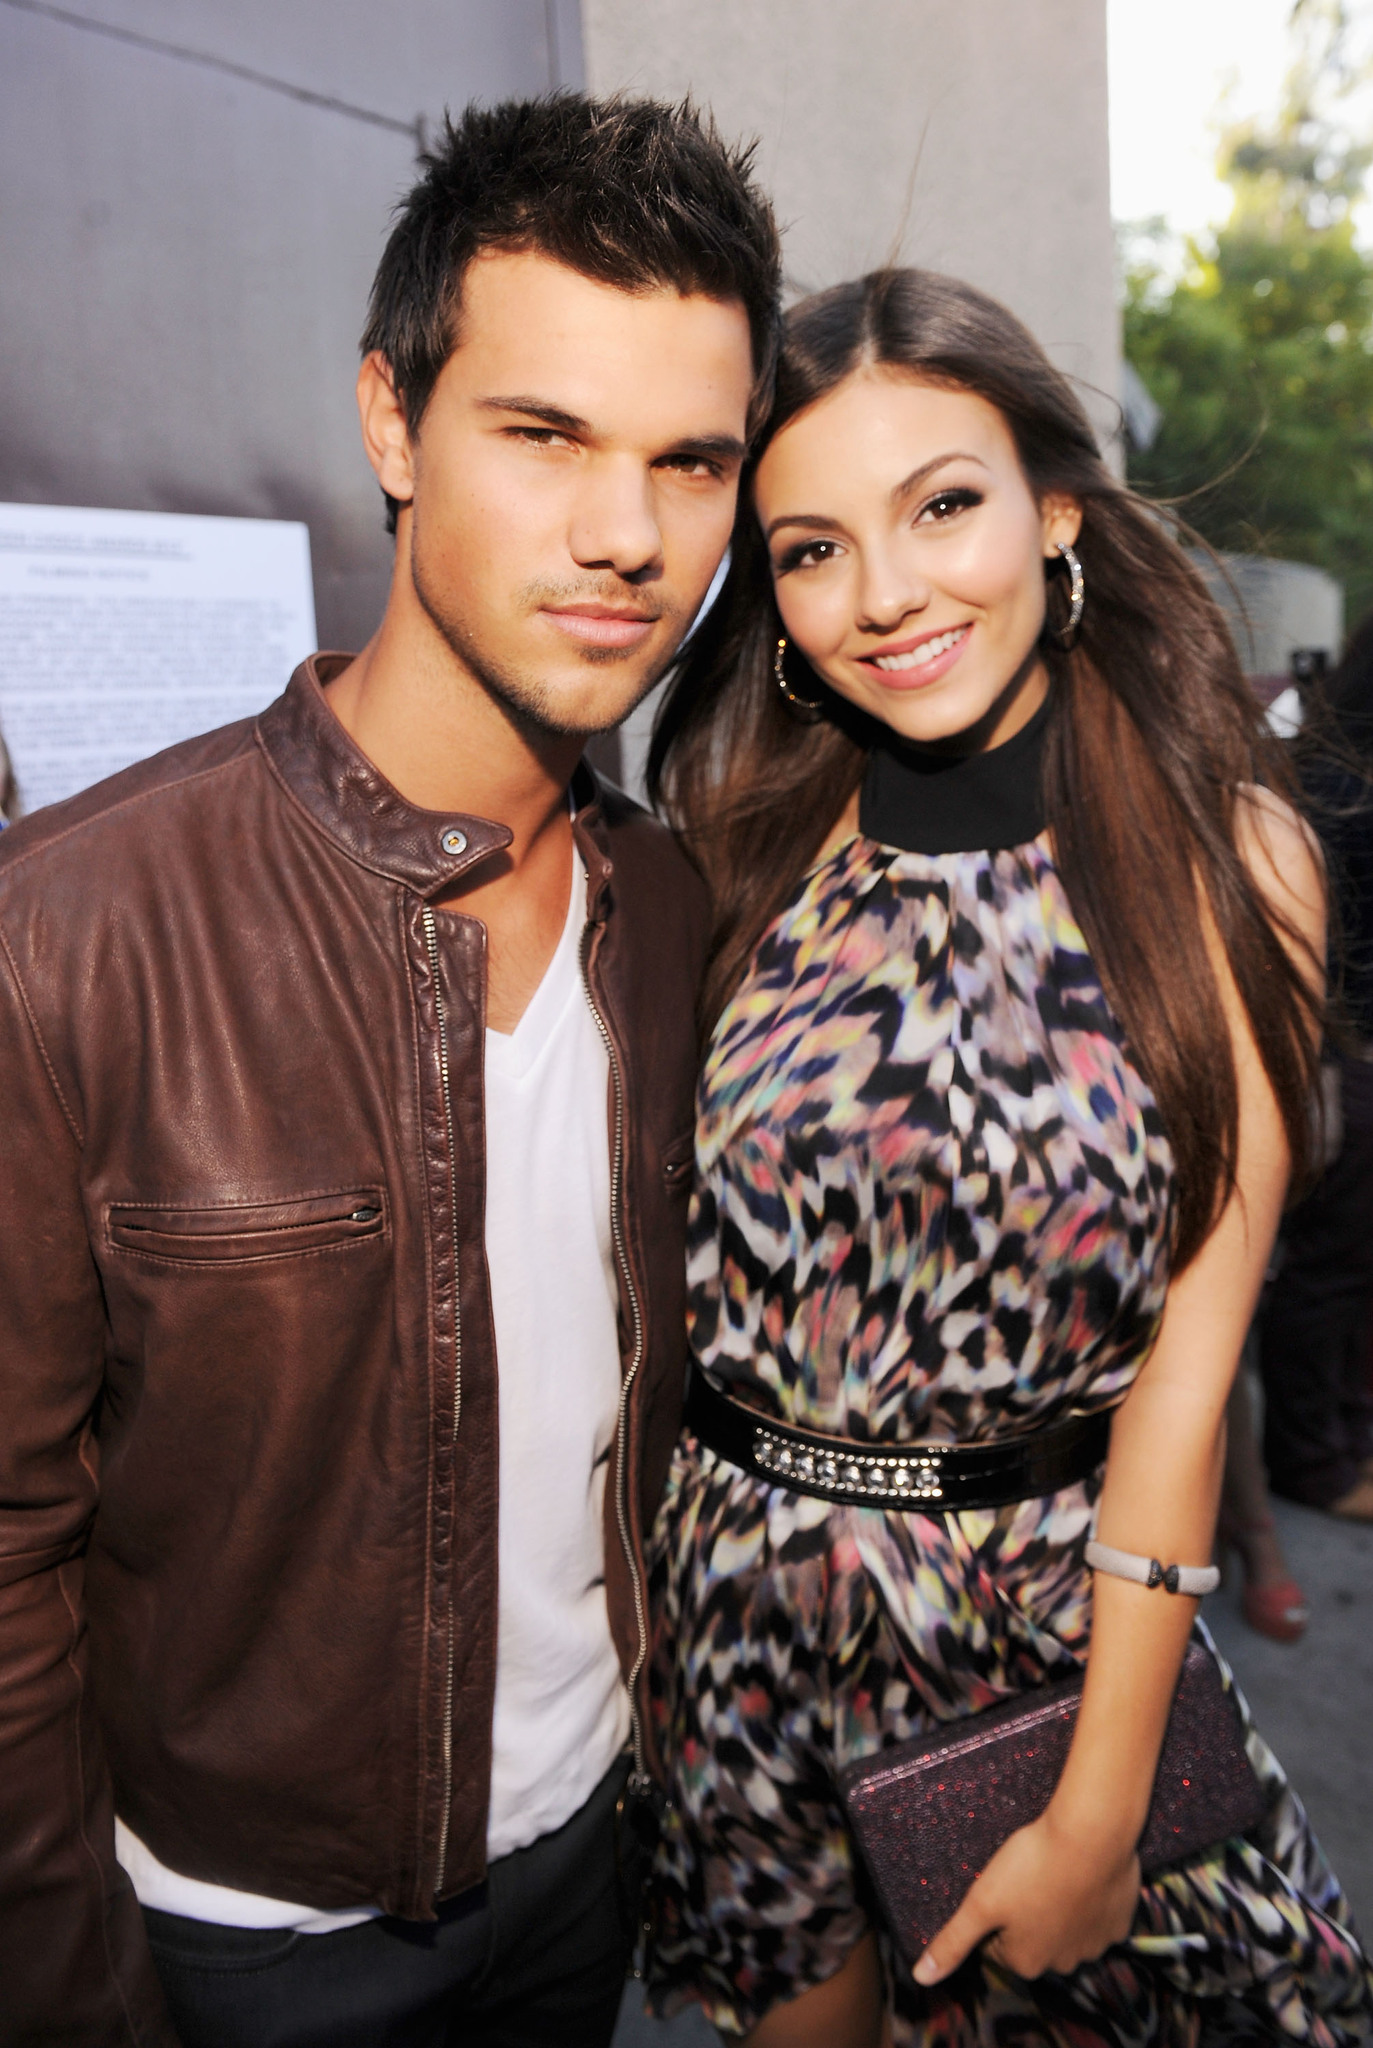 Taylor Lautner and Victoria Justice at event of Teen Choice Awards 2012 (2012)